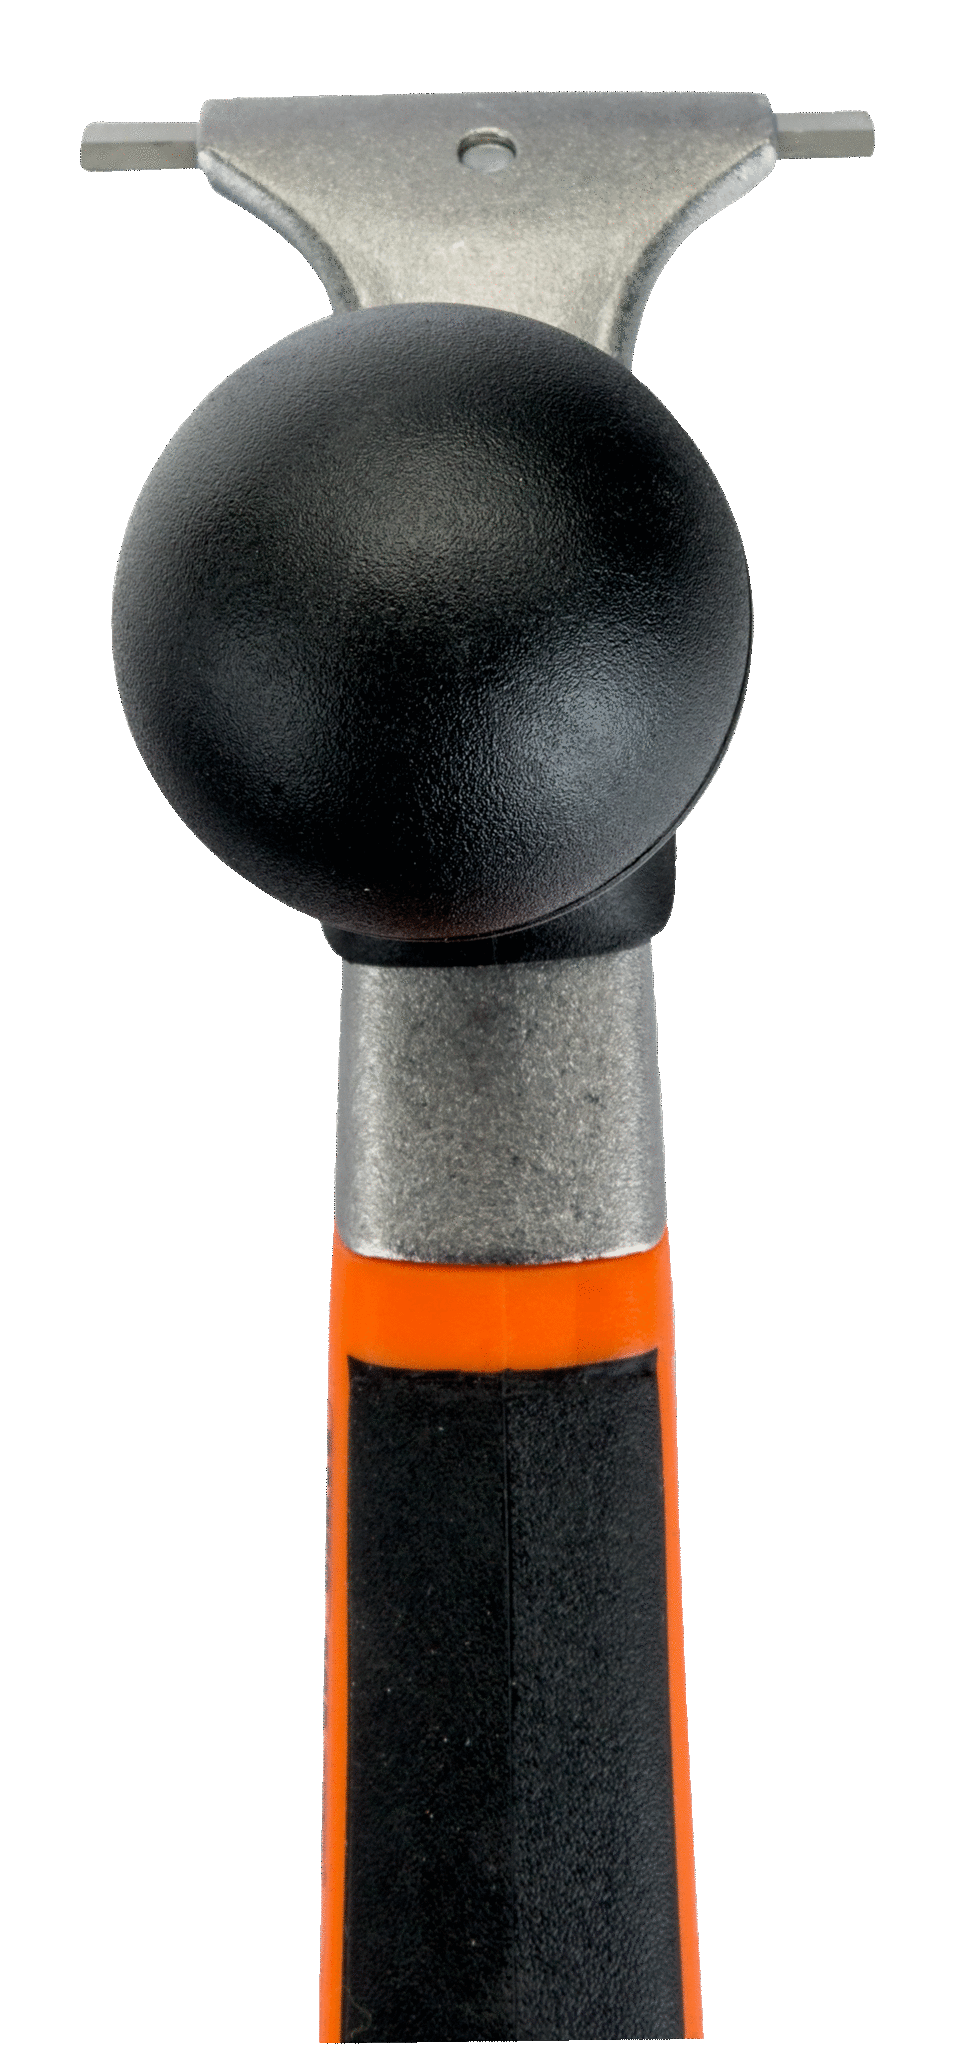 Paint Scraper 65mm Heavy Duty with Dual-Component Handle 665 by BAHCO